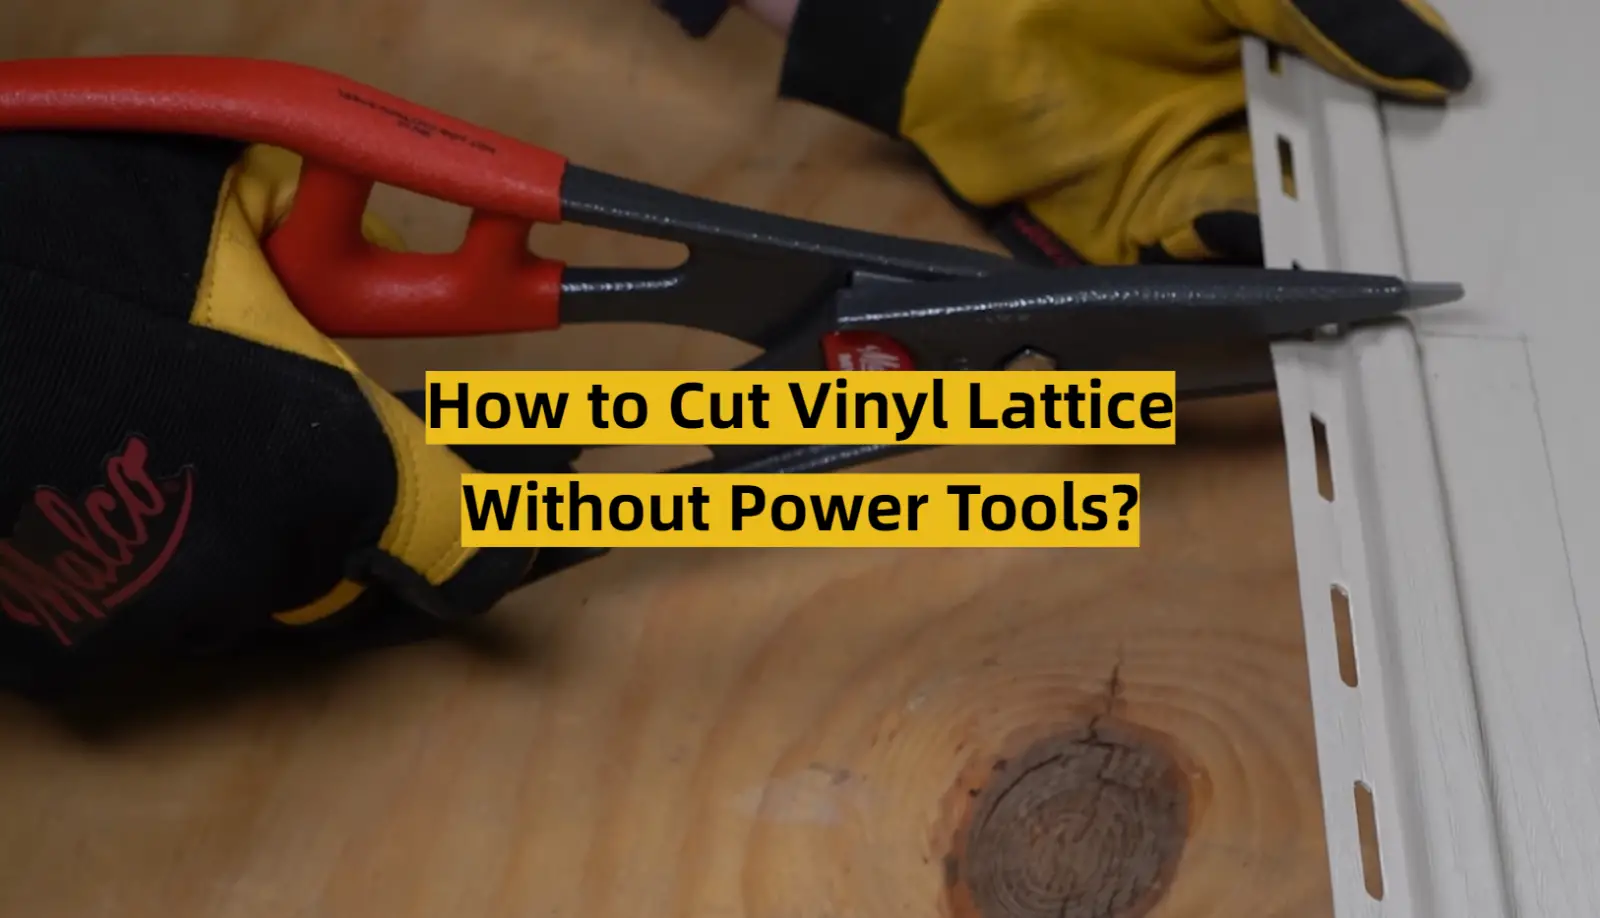 How to Cut Vinyl Lattice Without Power Tools?